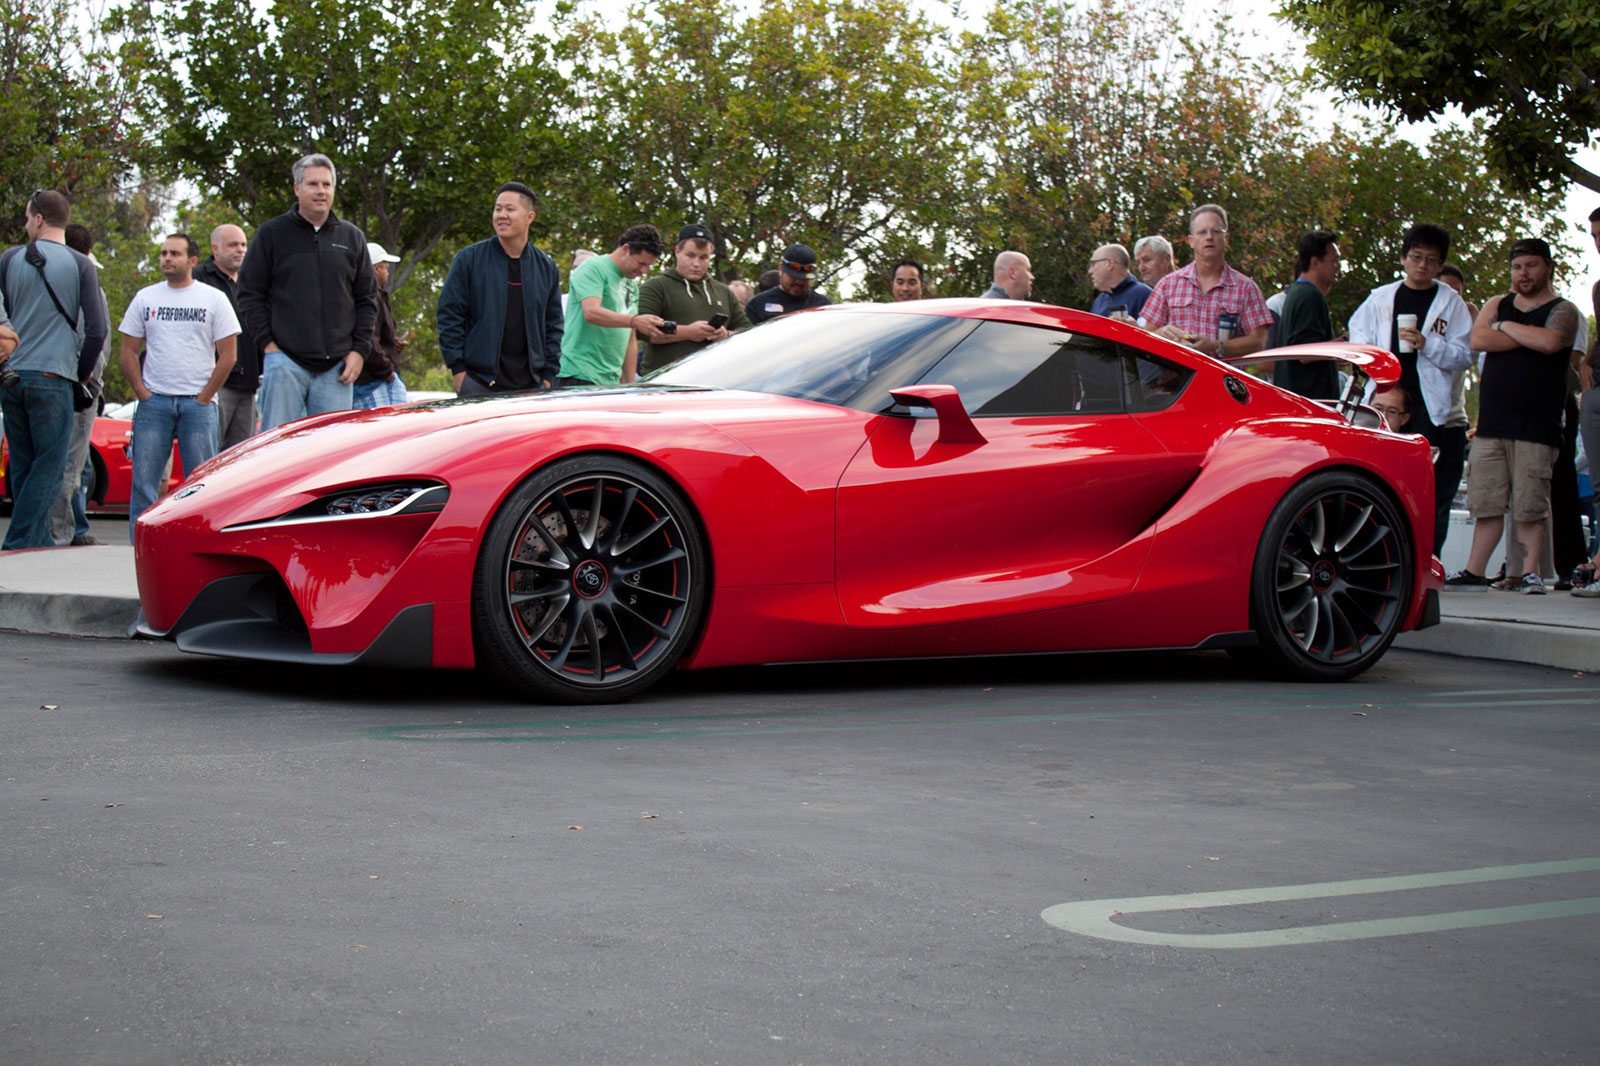 The Toyota FT1 Looks like a spaceship among normal people.